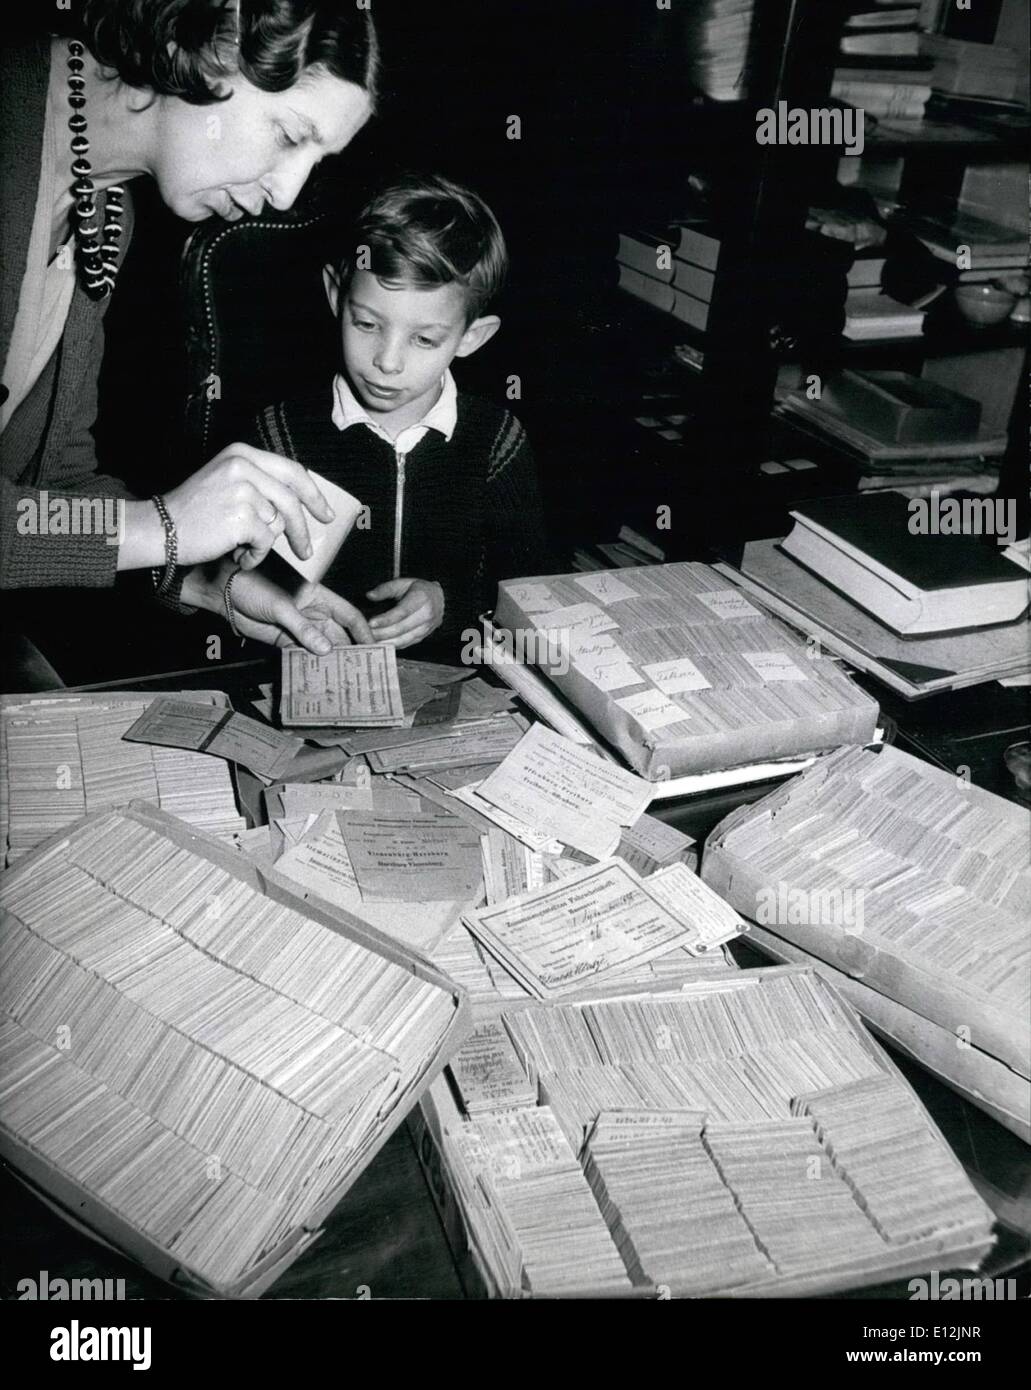 Feb. 24, 2012 - His hobby are railway tickets. 8 year old pupiel Anhard Klein from Nuremberg Germany is collecting railway tickets. Here he is seen classifying the tickets. He just got 7,000 ones from his father who collected them since 50 years. Anhard is very proud to have a ticket dated from 1835 issued by the railway administration of Konig Ludwig Bahn , first German railway ligne. Keystone pict from Feb. 26th, 57 Stock Photo